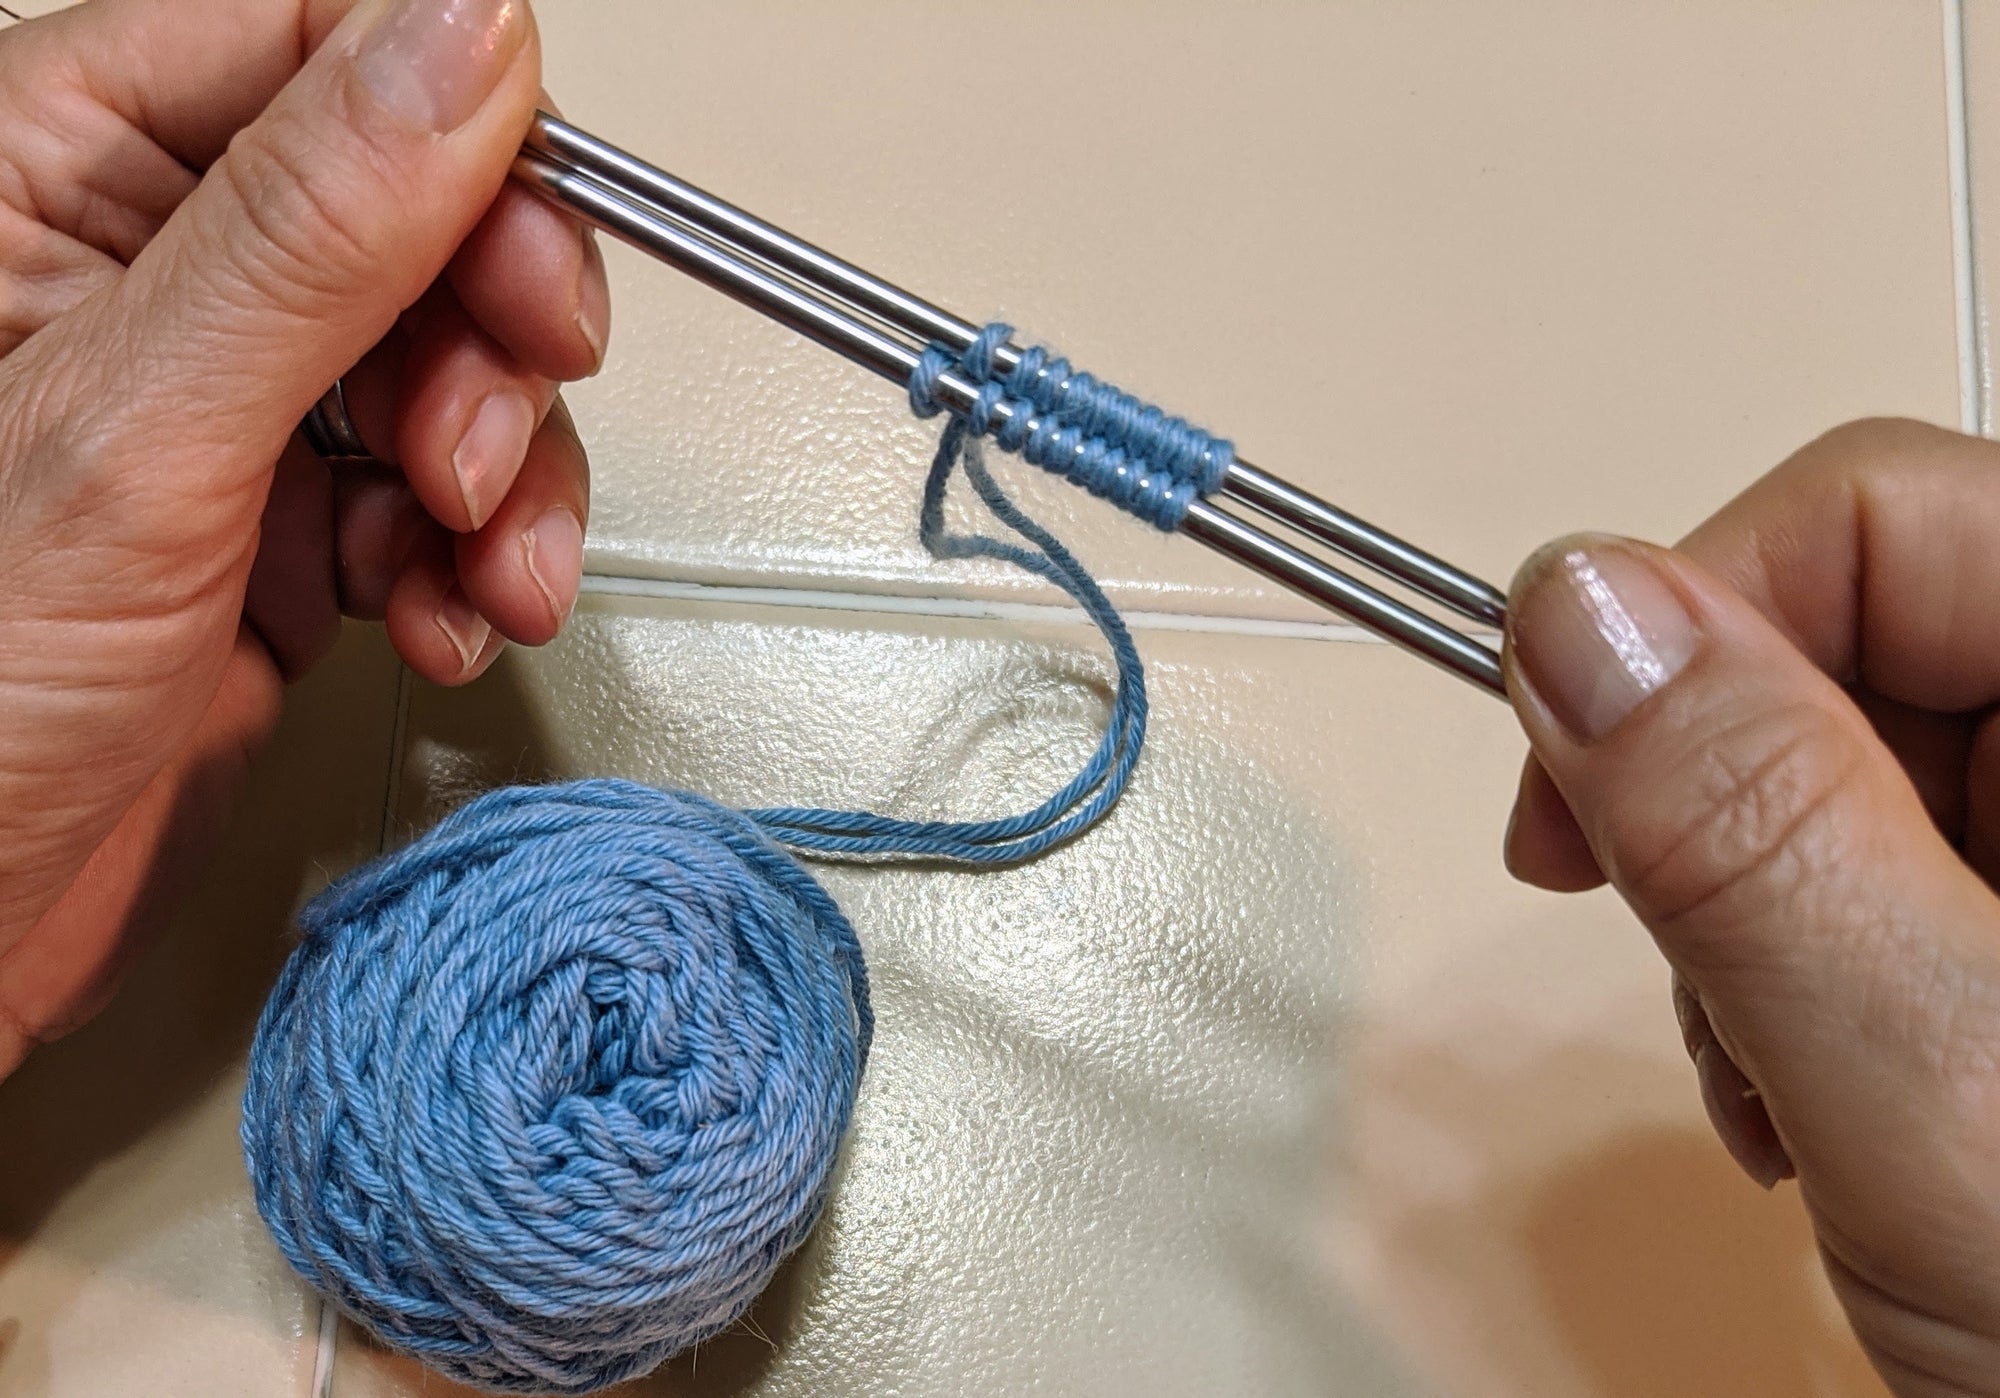 Learn to Knit Kits - Best Beginner Knitting Kits by The Spinning